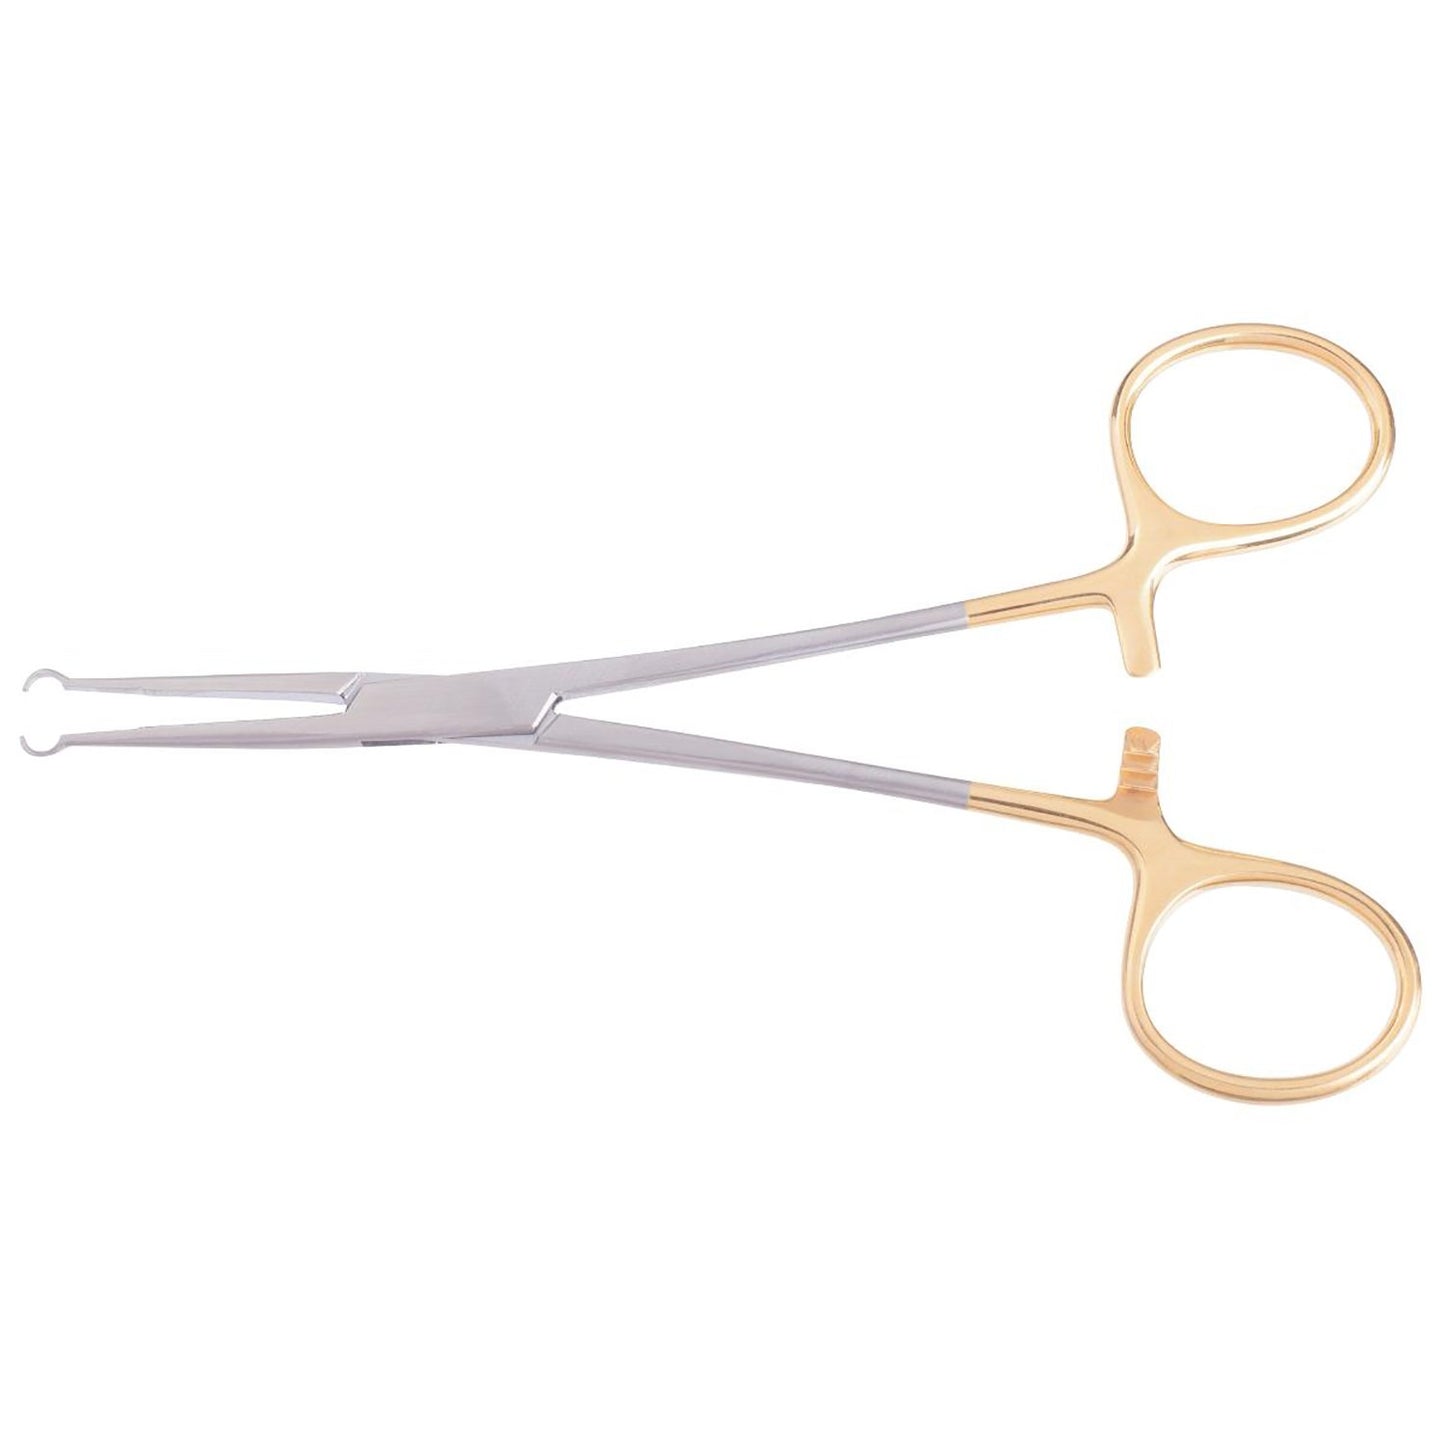 NO SCALPEL VASECTOMY INSTR, GOLD FINGER RINGS, 5 1/2 (14.0 CM), RING CLAMP  - Midwest Surgical